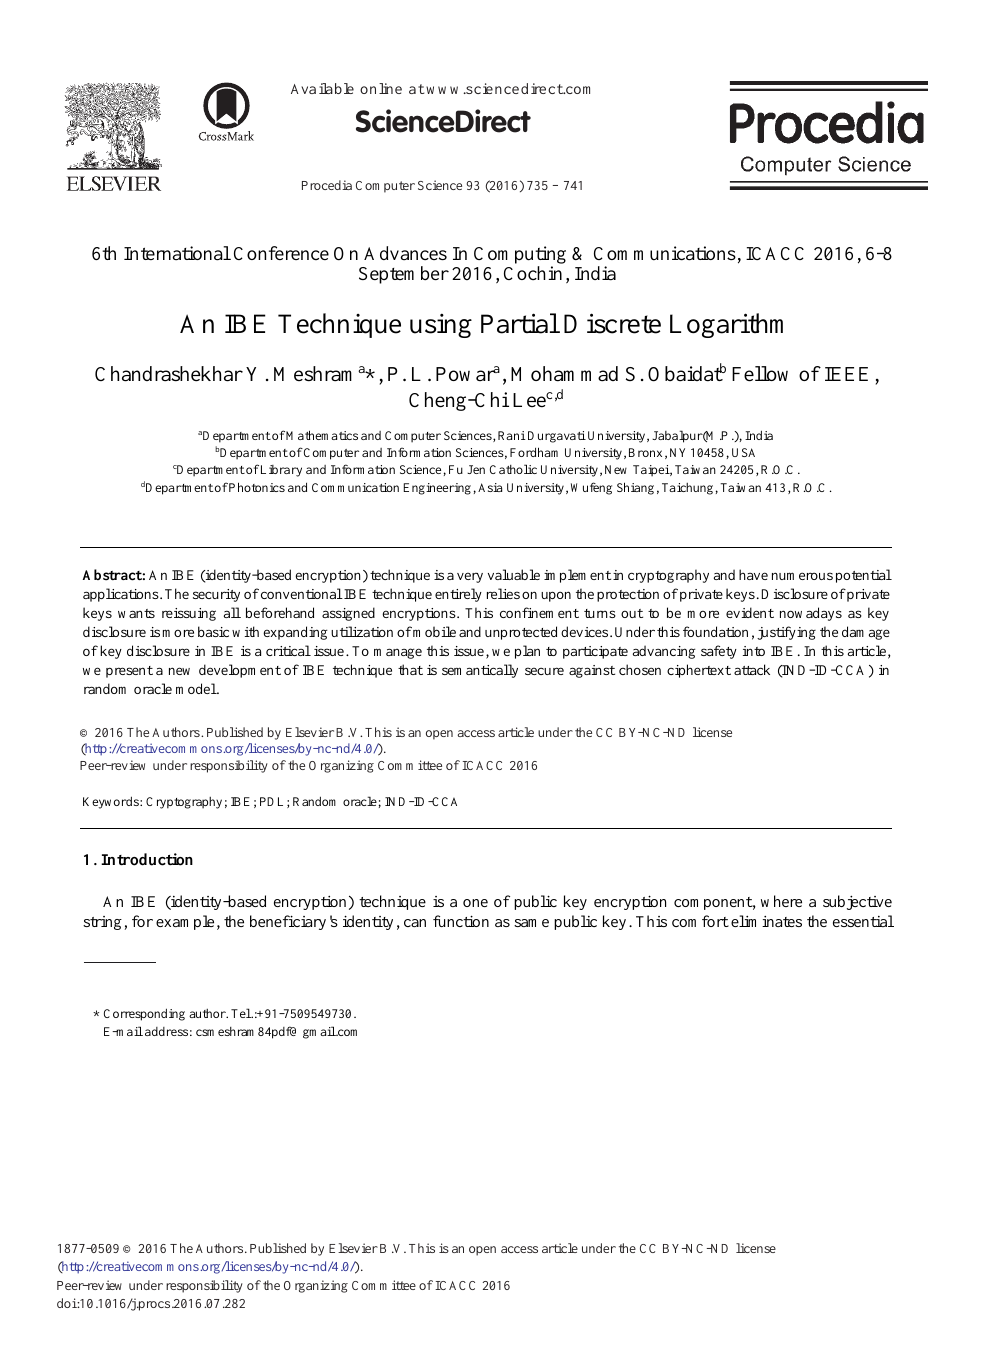 An Ibe Technique Using Partial Discrete Logarithm Topic Of Research Paper In Computer And Information Sciences Download Scholarly Article Pdf And Read For Free On Cyberleninka Open Science Hub